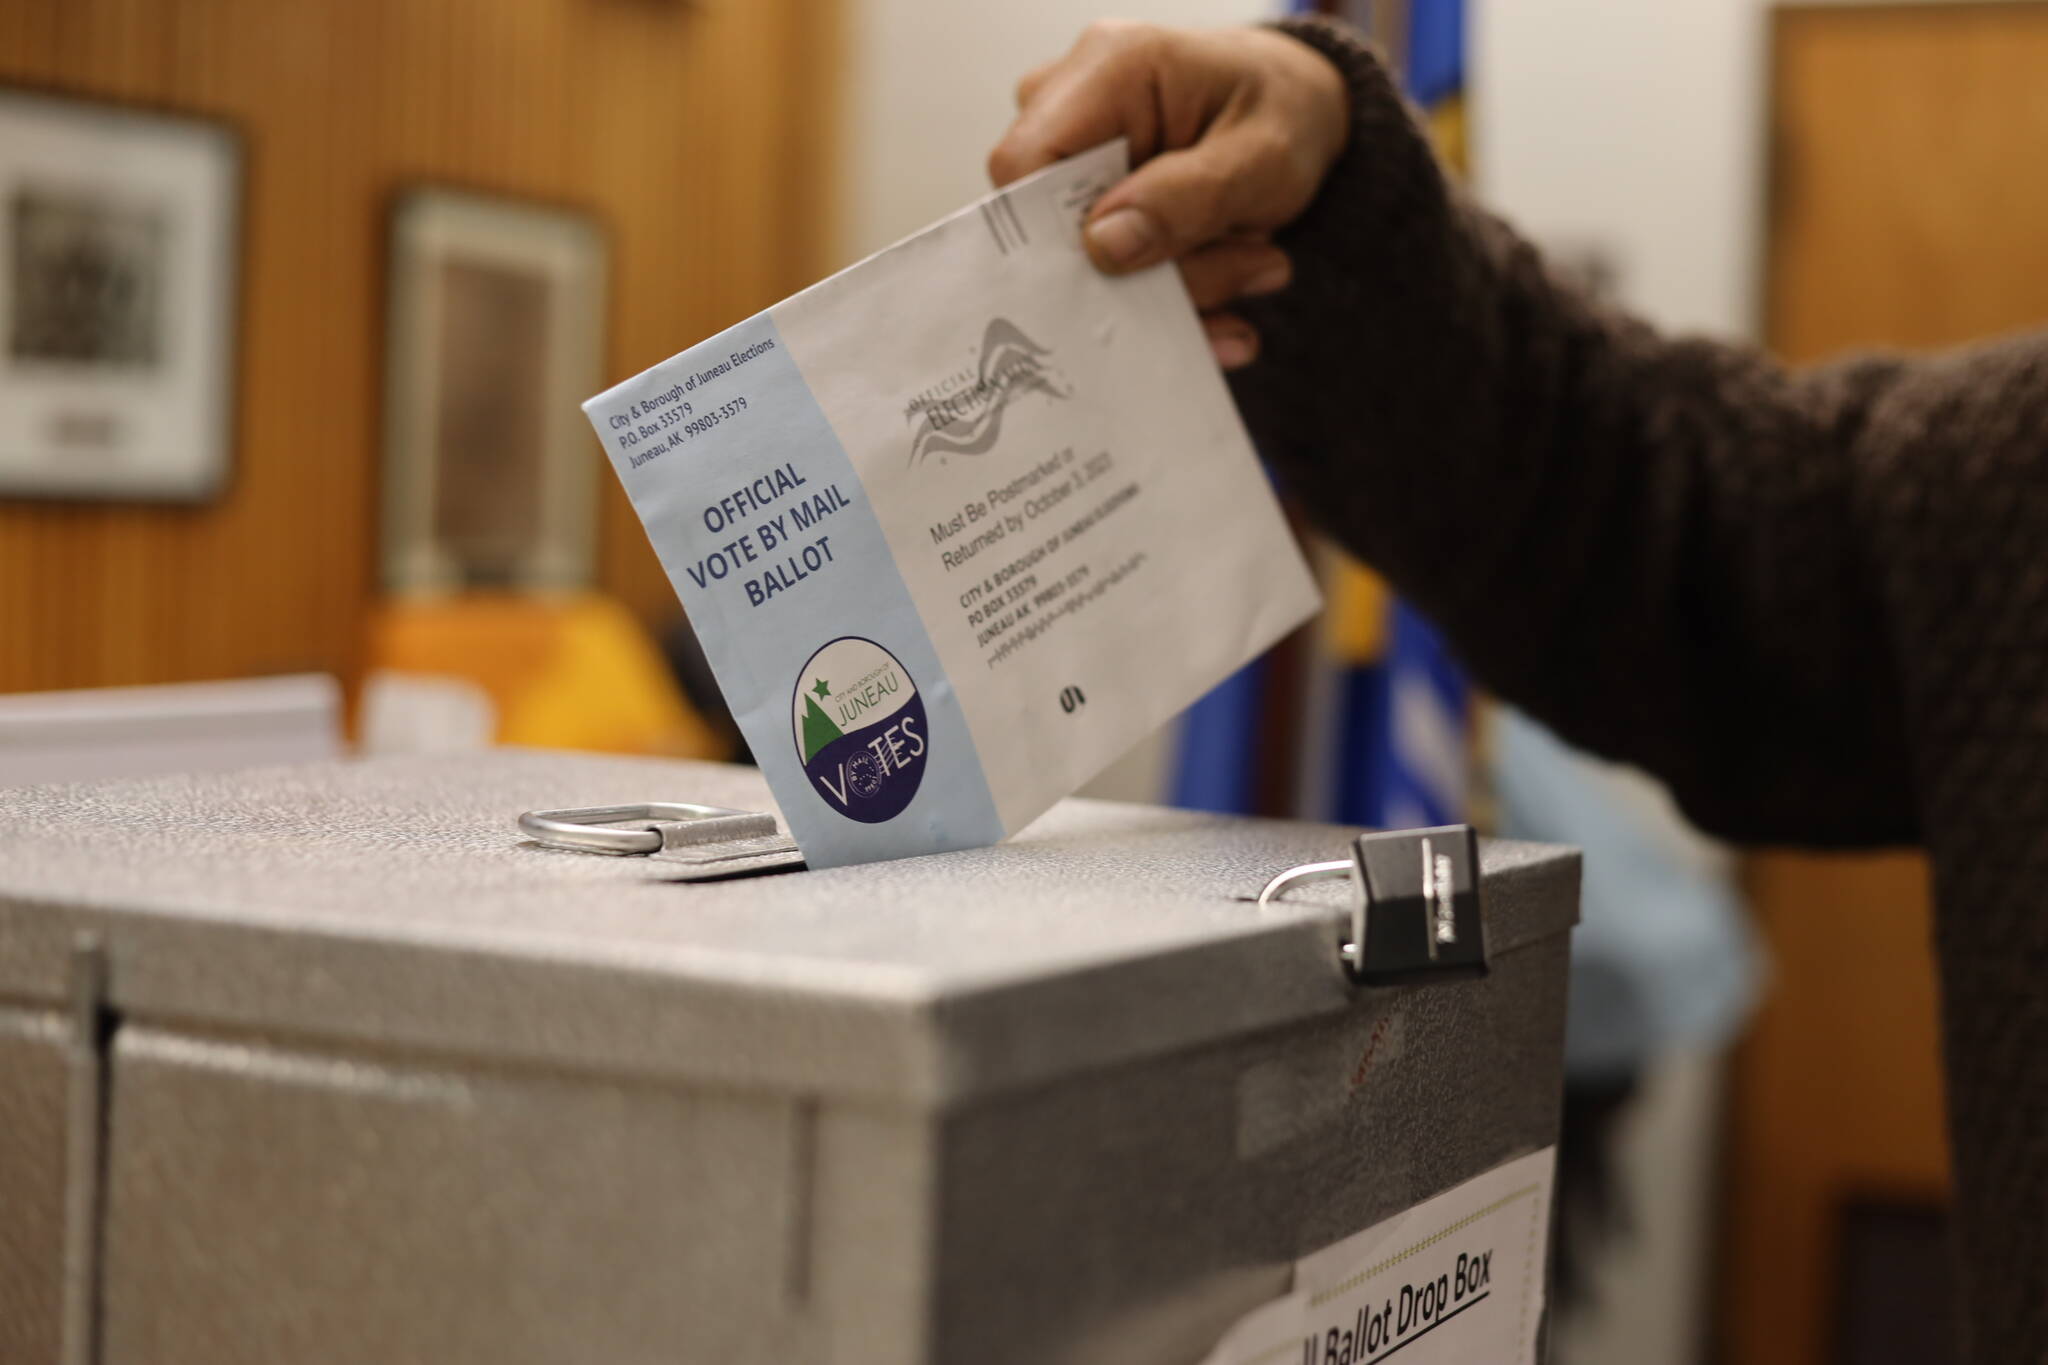 Michael Beasley drops a ballot into a drop box at the City Hall Assembly Chambers on Election Day Tuesday morning. (Clarise Larson / Juneau Empire)